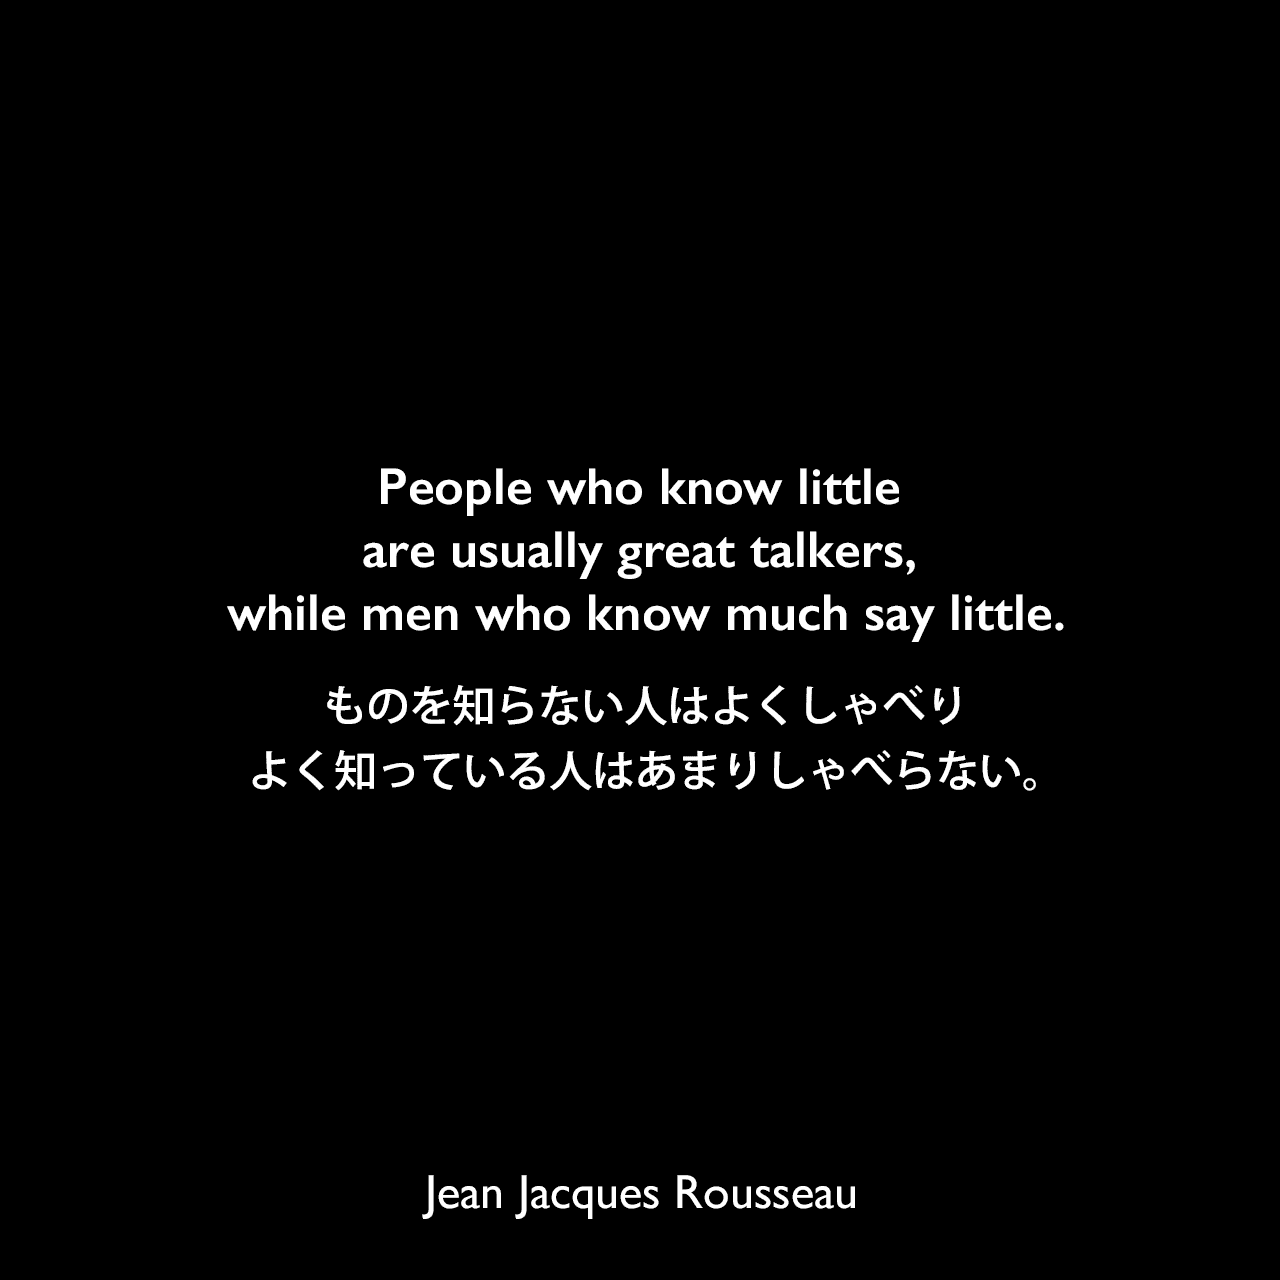 People who know little are usually great talkers, while men who know much say little.ものを知らない人はよくしゃべり、よく知っている人はあまりしゃべらない。Jean Jacques Rousseau